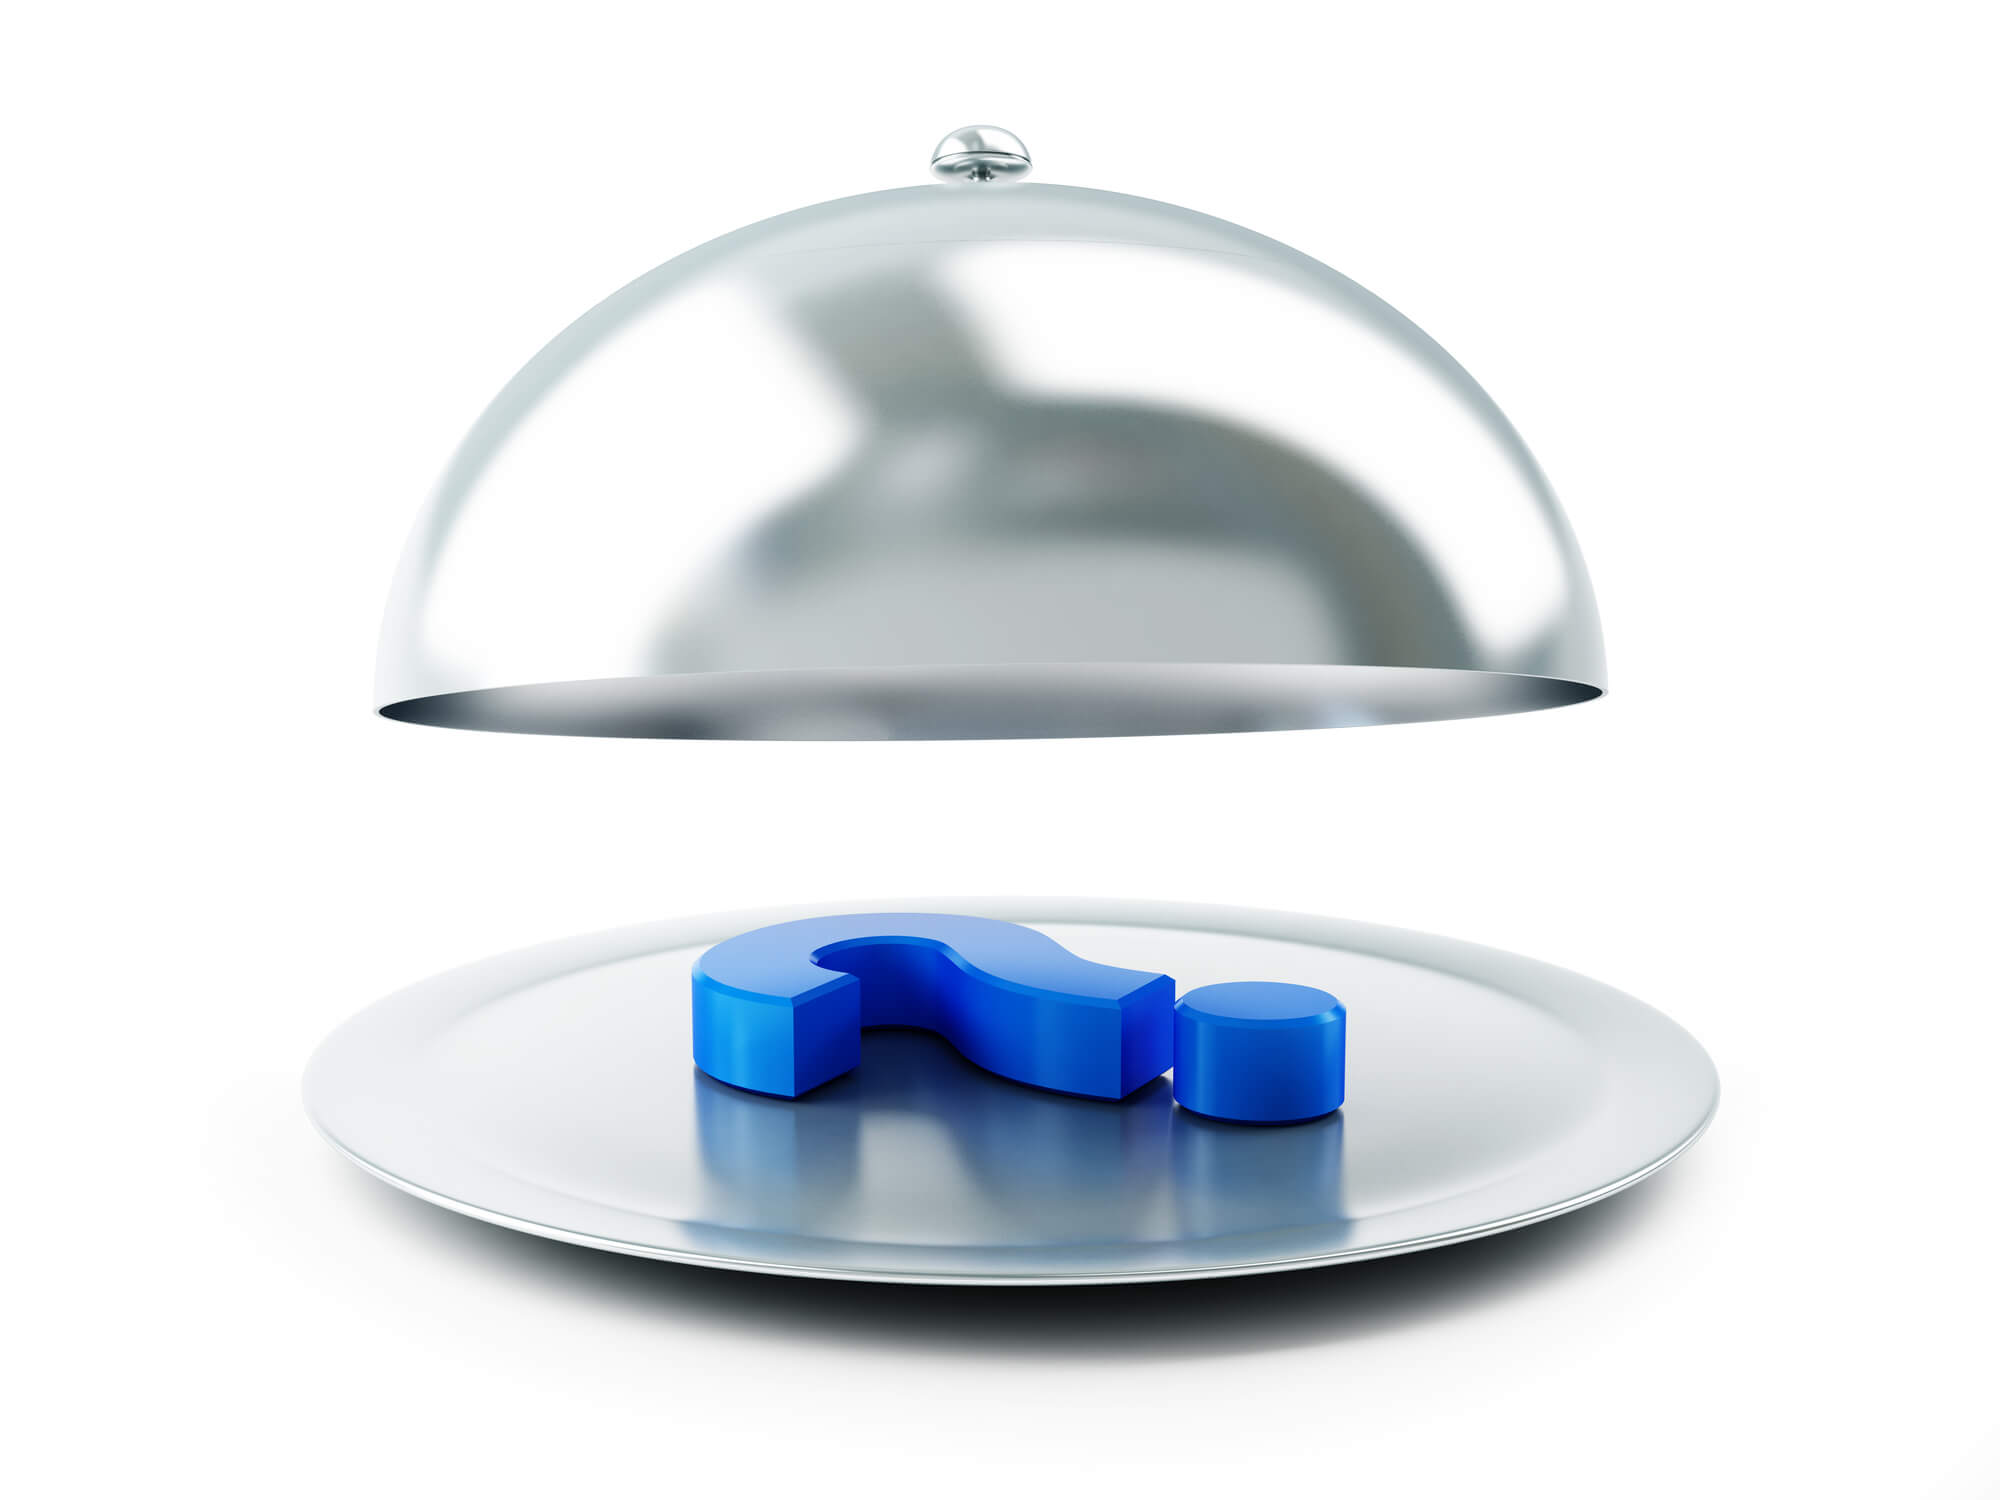 Serving dish with blue question mark